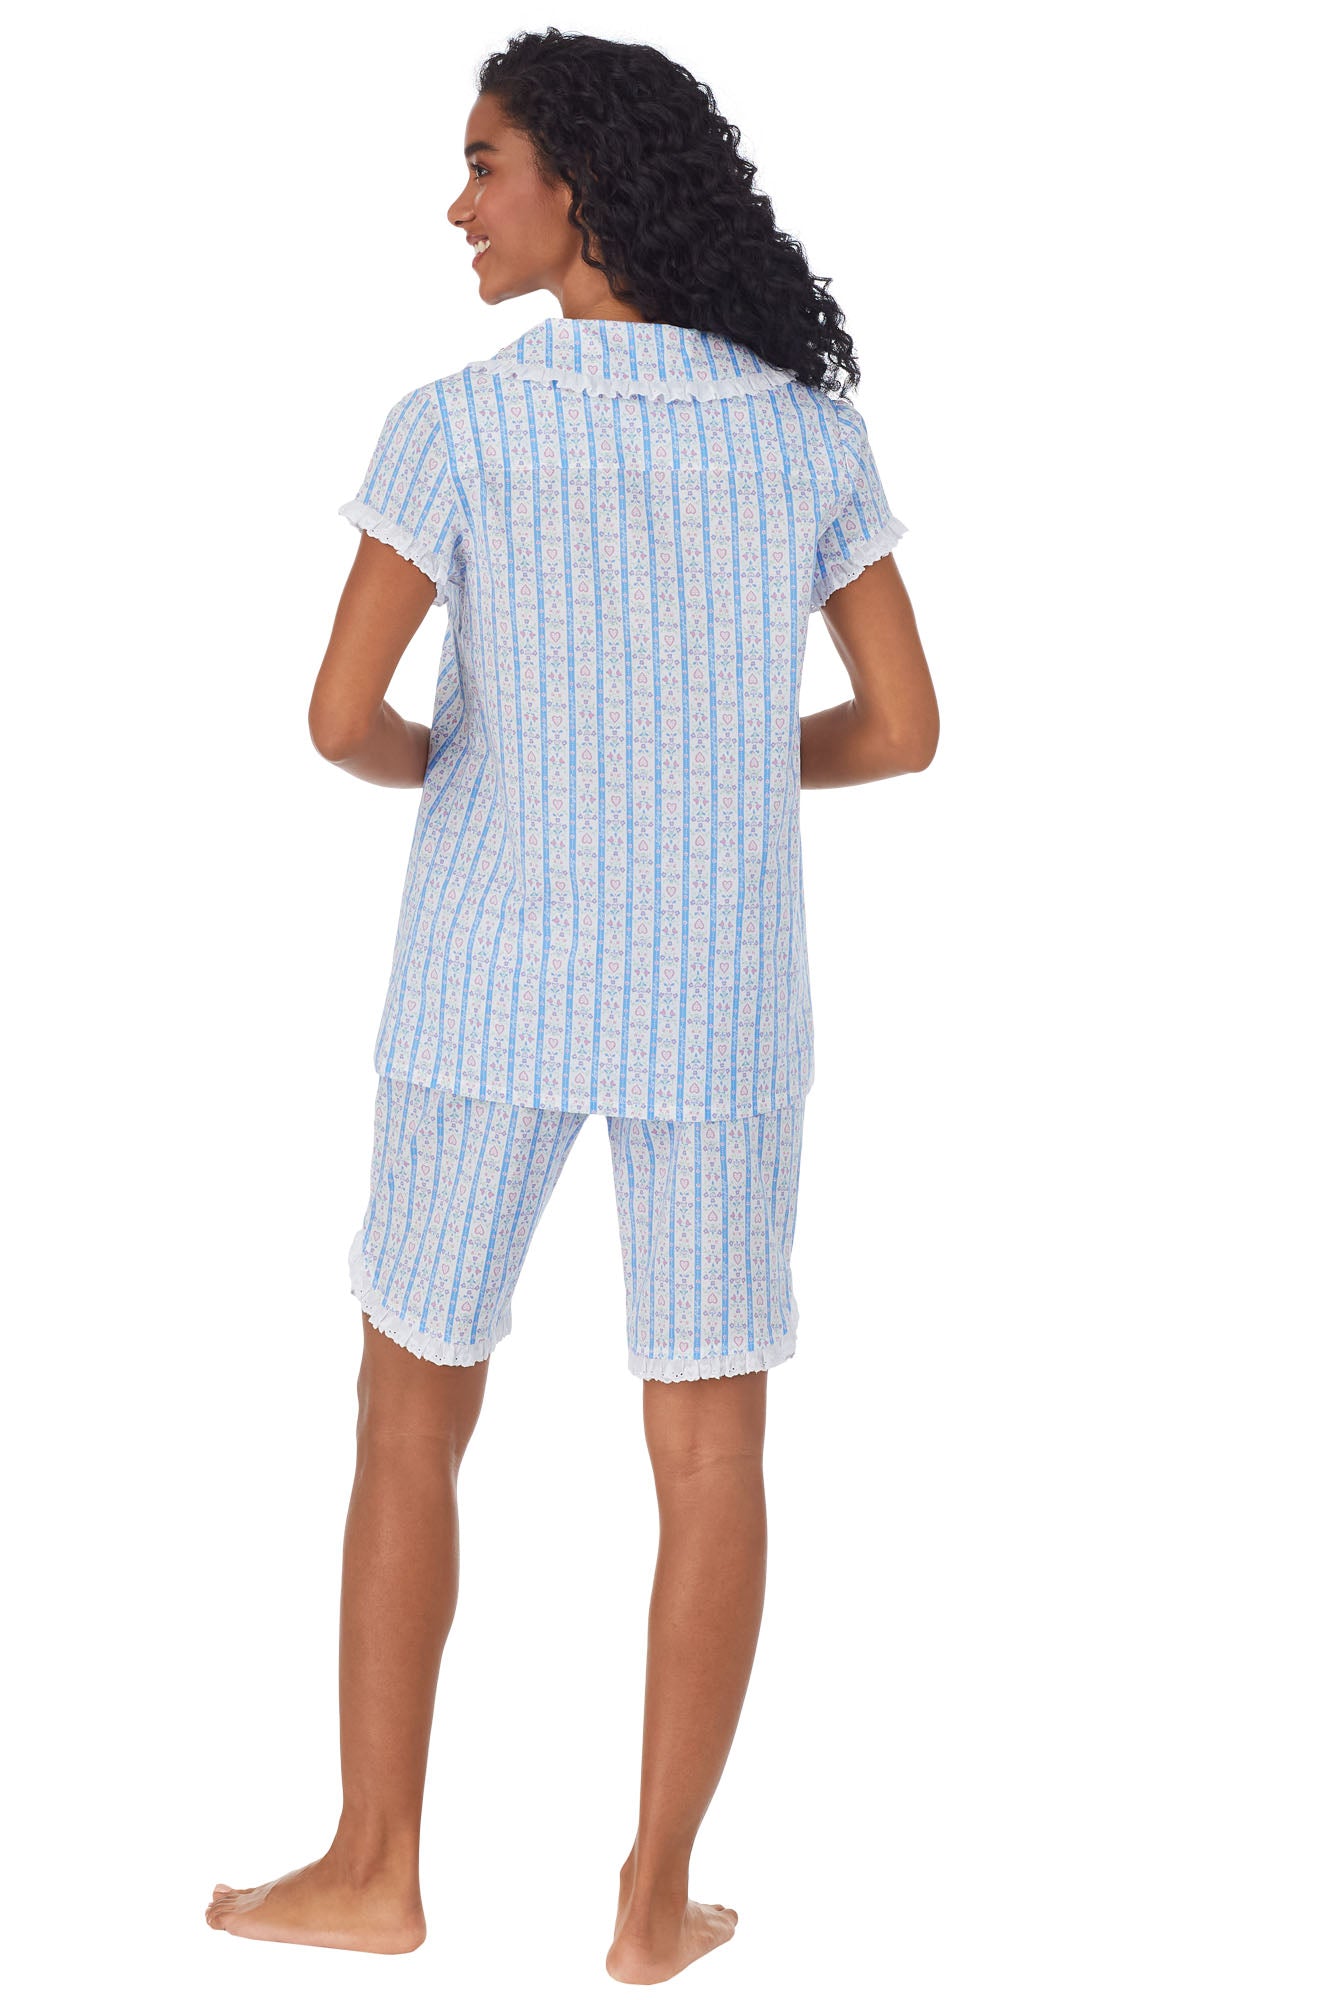 Back view of A lady wearing white short pajama set with blue pattern